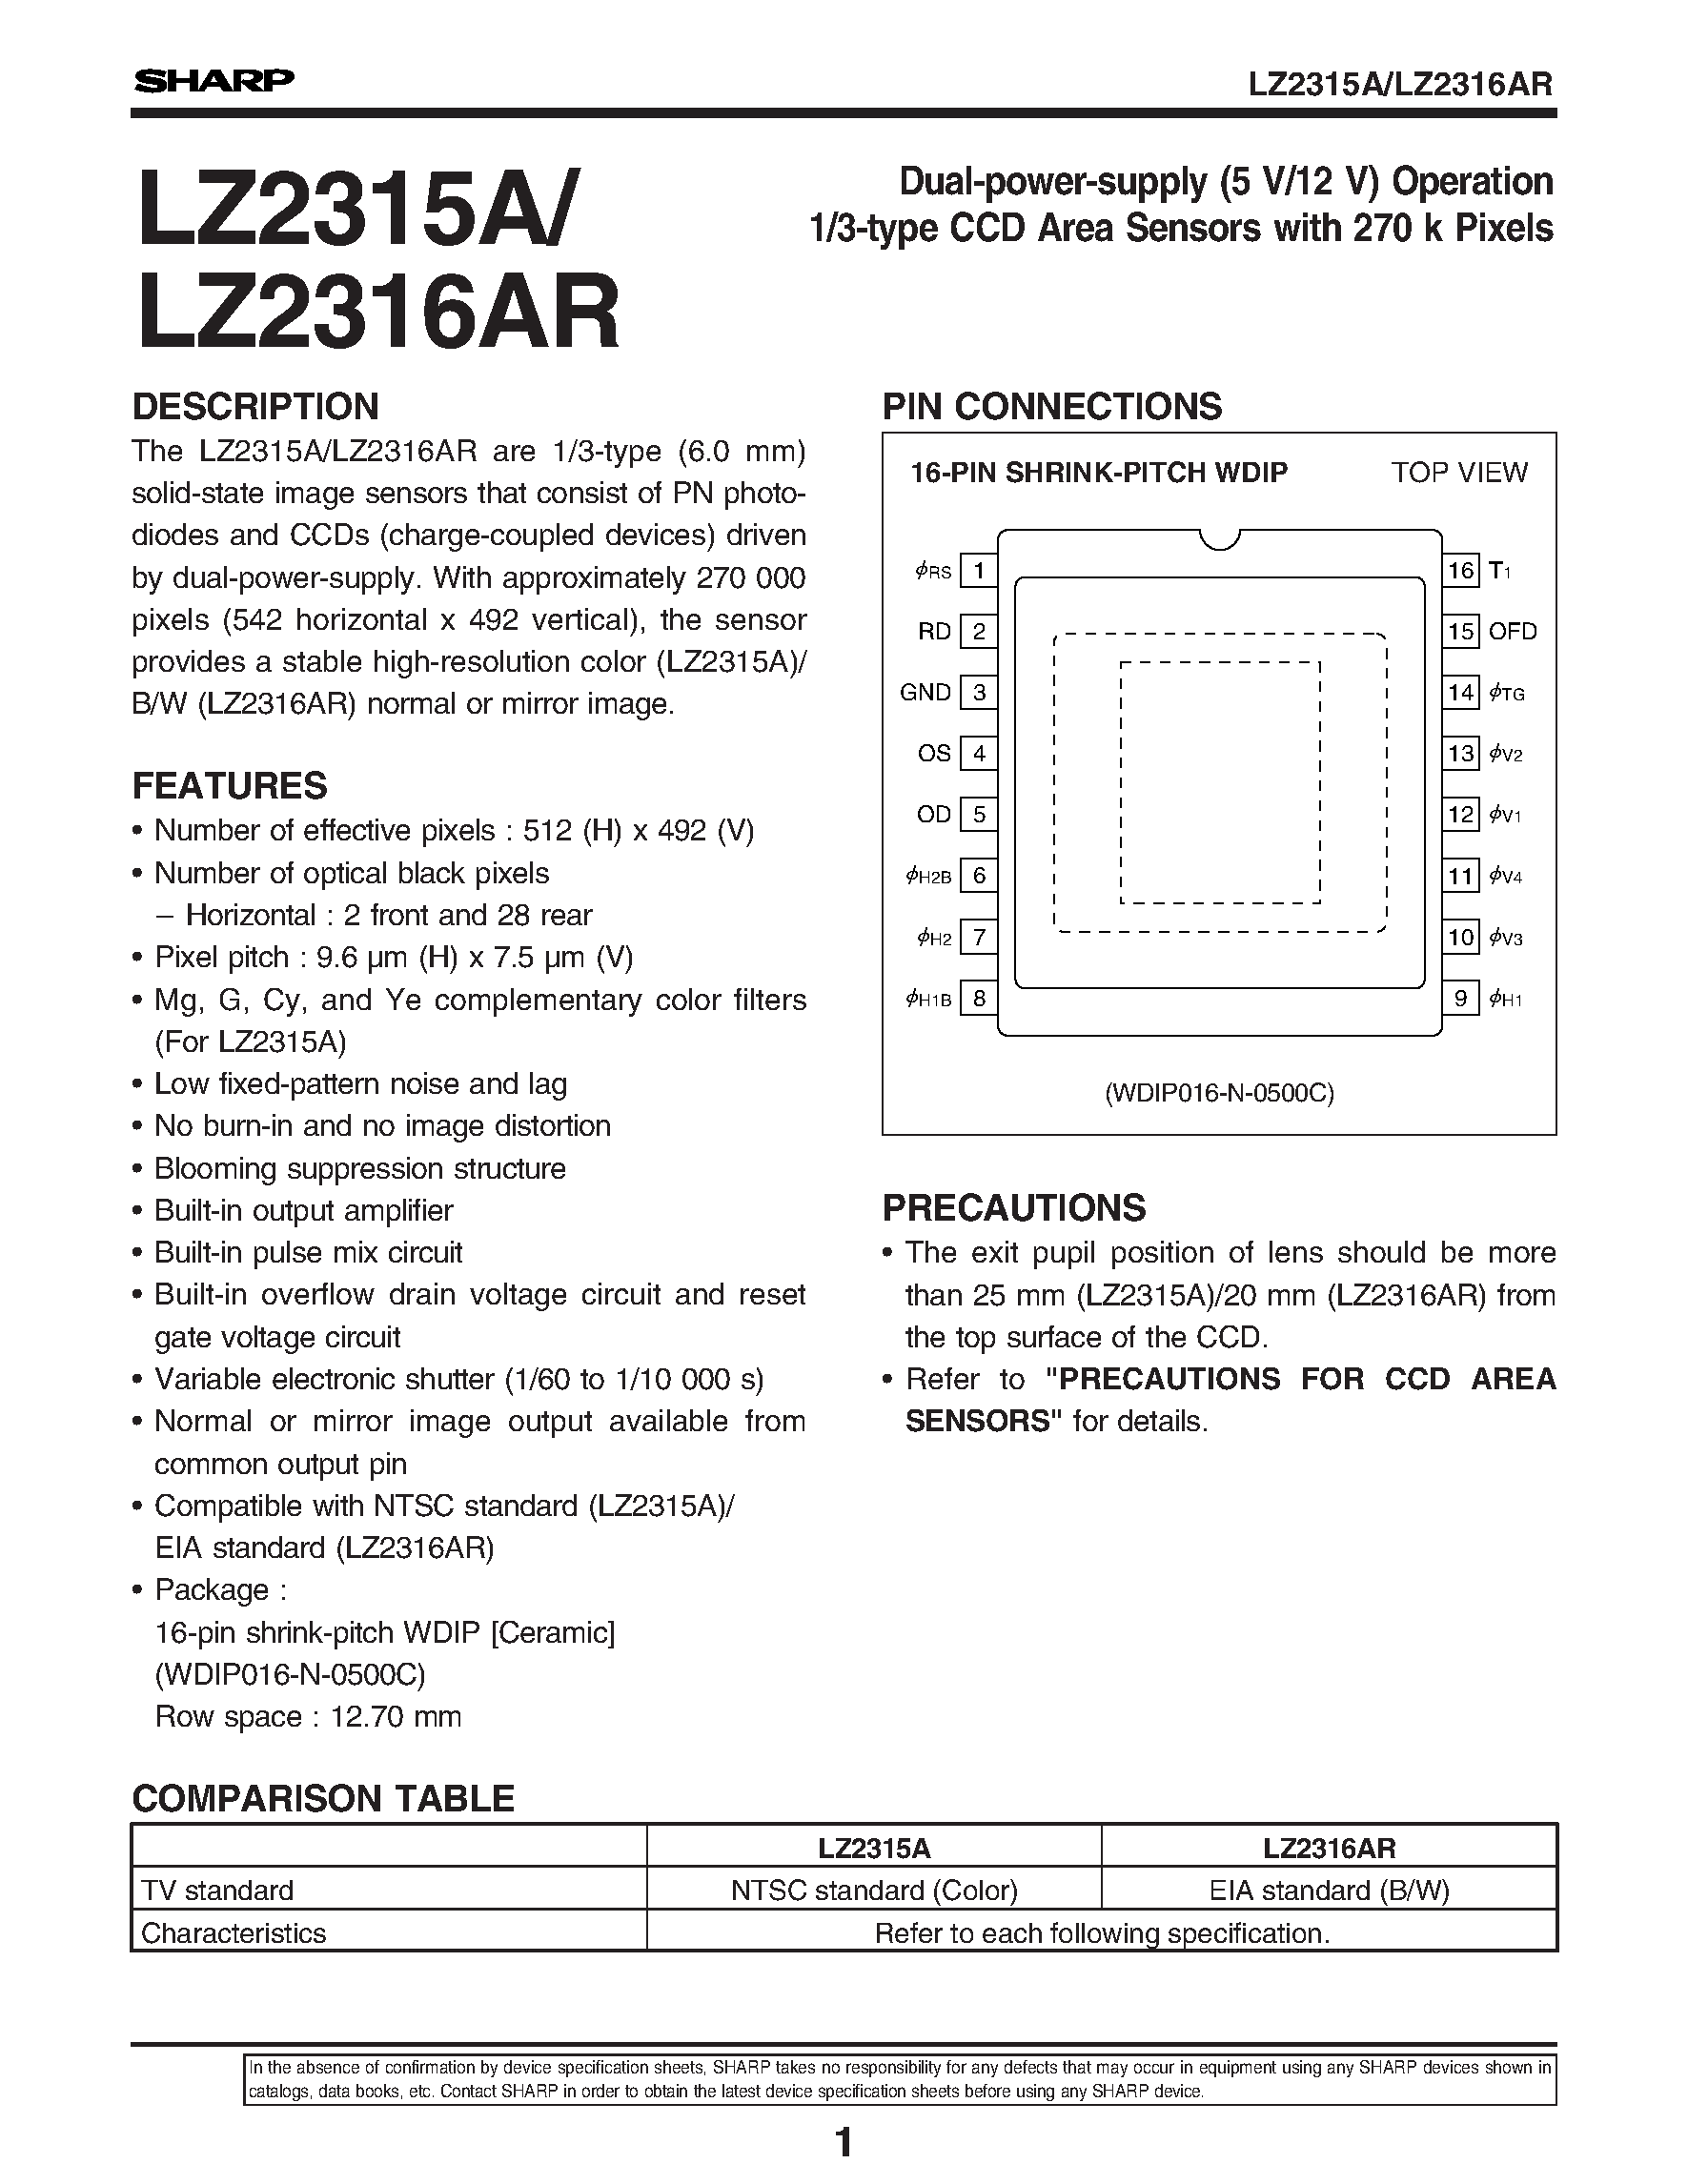 Datasheet LZ2315A - Dual-power-supply (5 V/12 V) Operation 1/3-type CCD Area Sensors with 270 k Pixels page 1